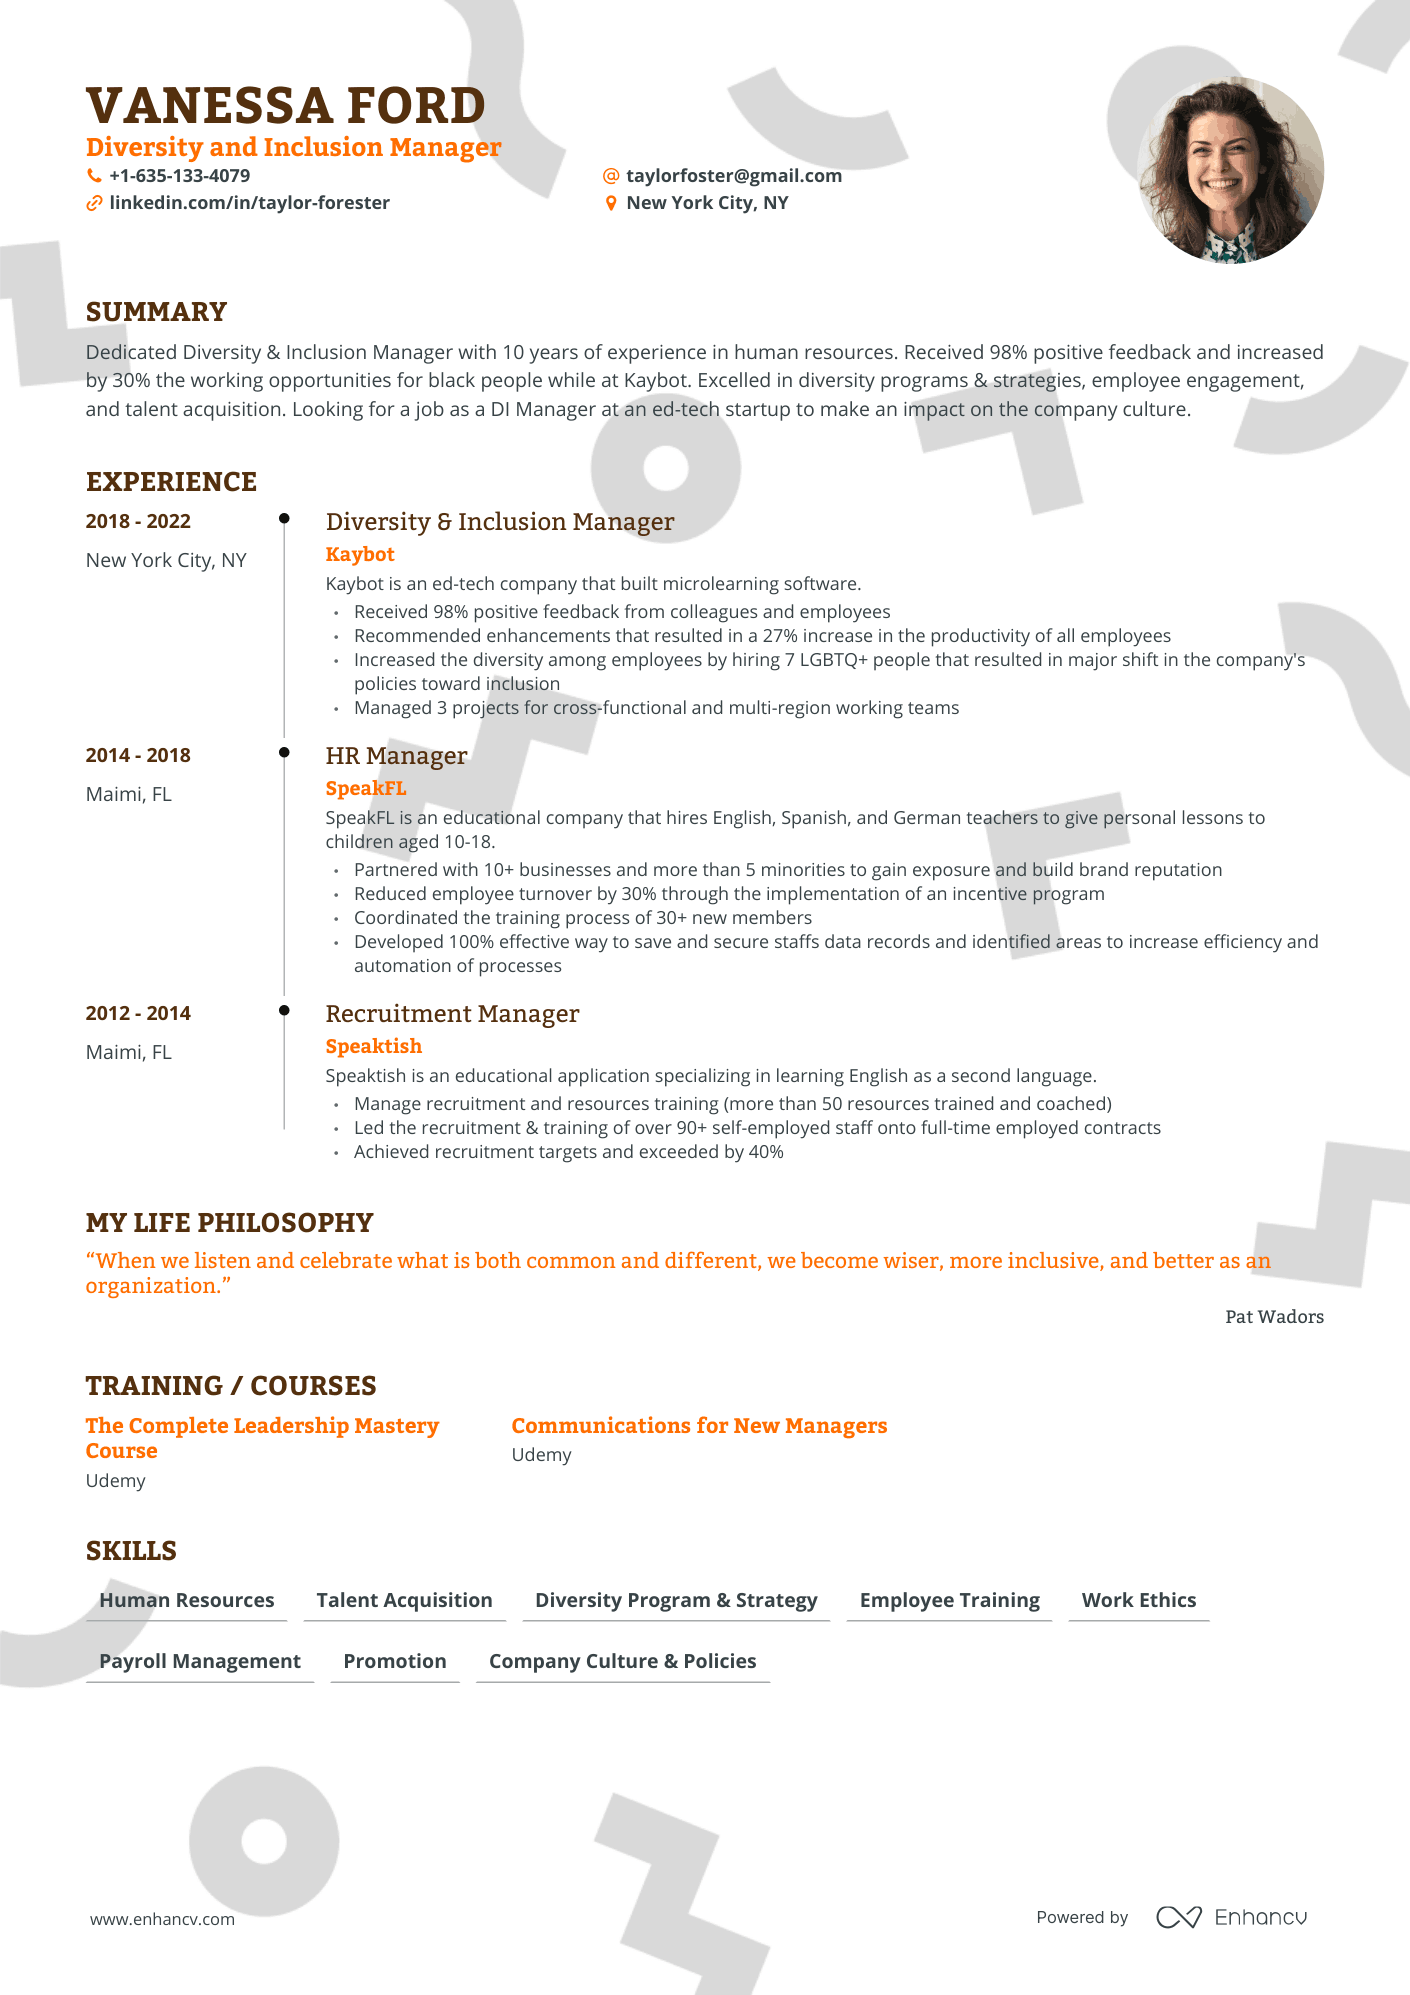 Timeline Diversity & Inclusion Manager Resume Template